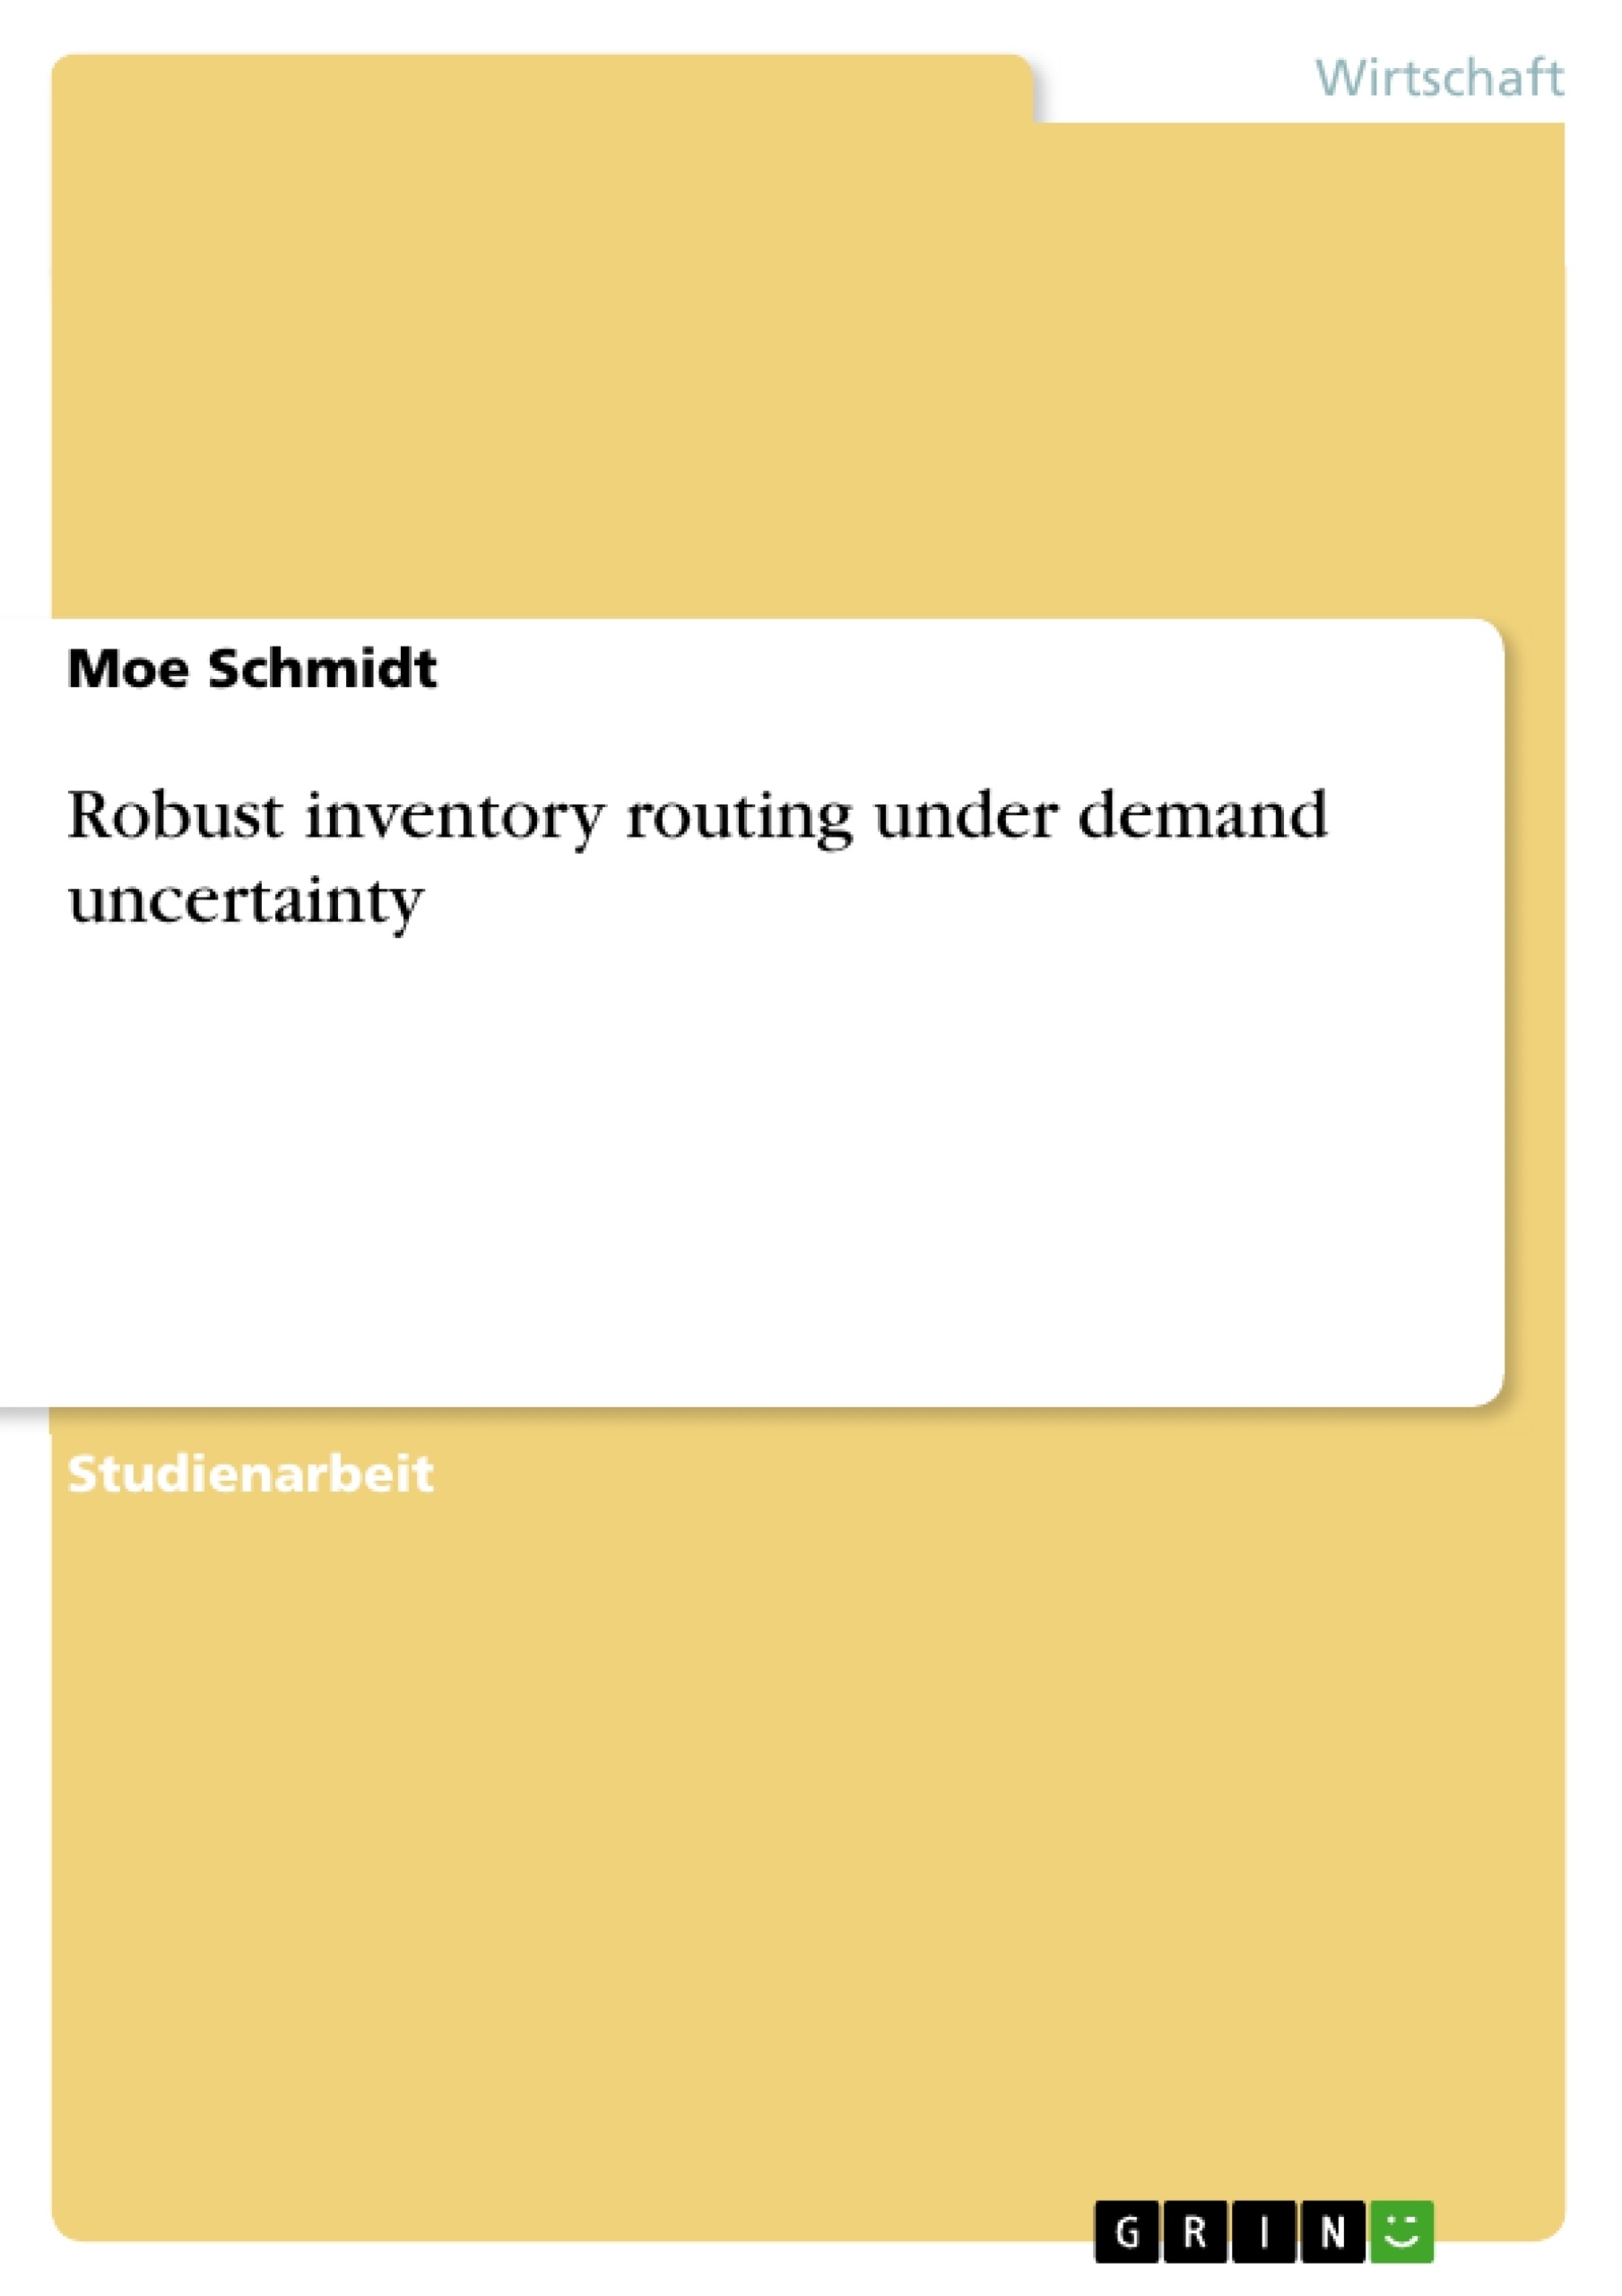 Título: Robust inventory routing under demand uncertainty